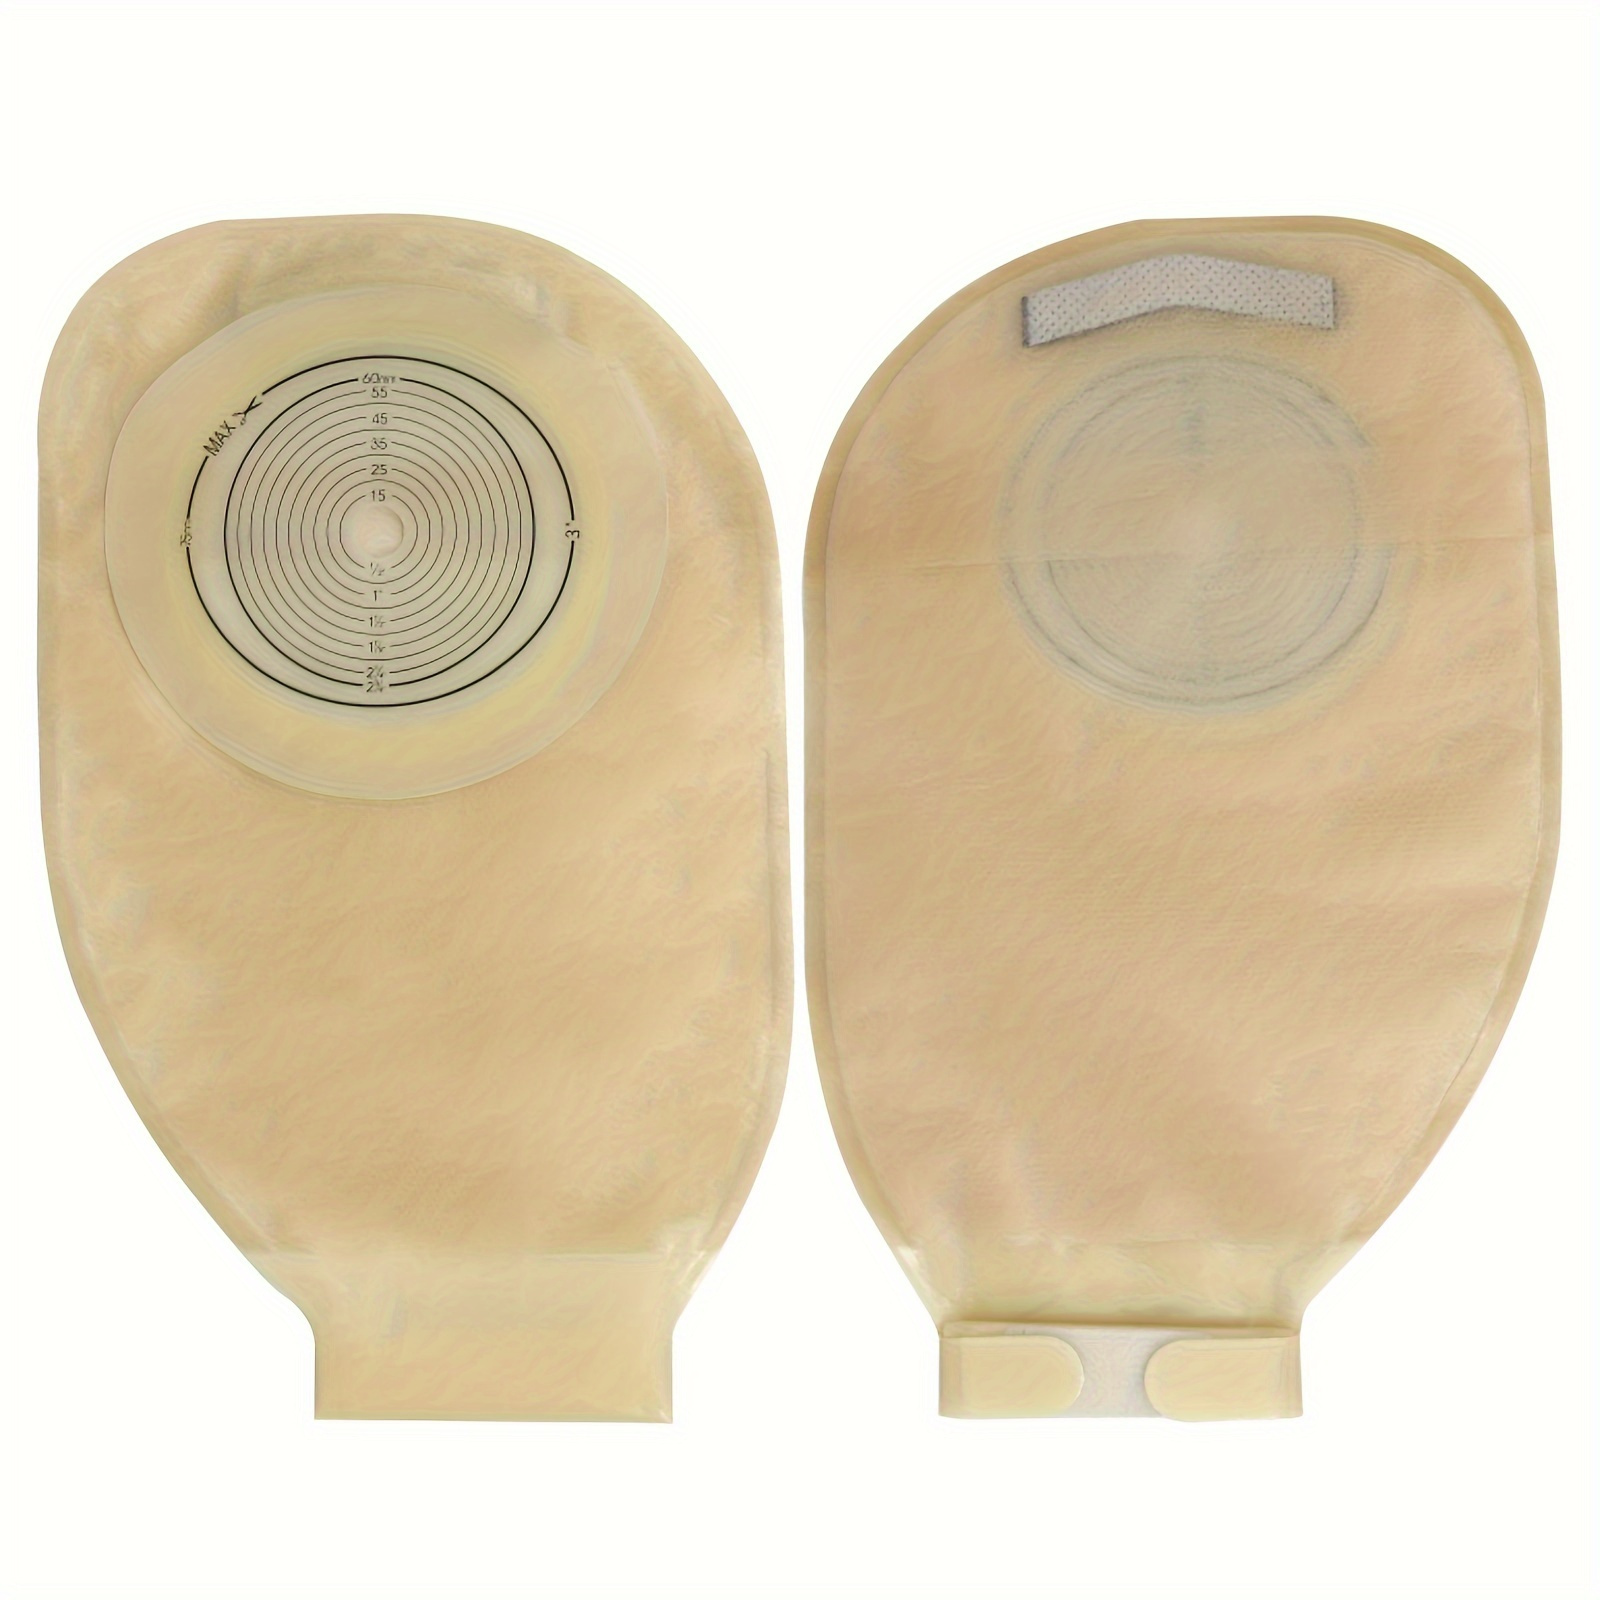 Ostomy Bags One Piece Drainable Pouches for Colostomy Ileostomy